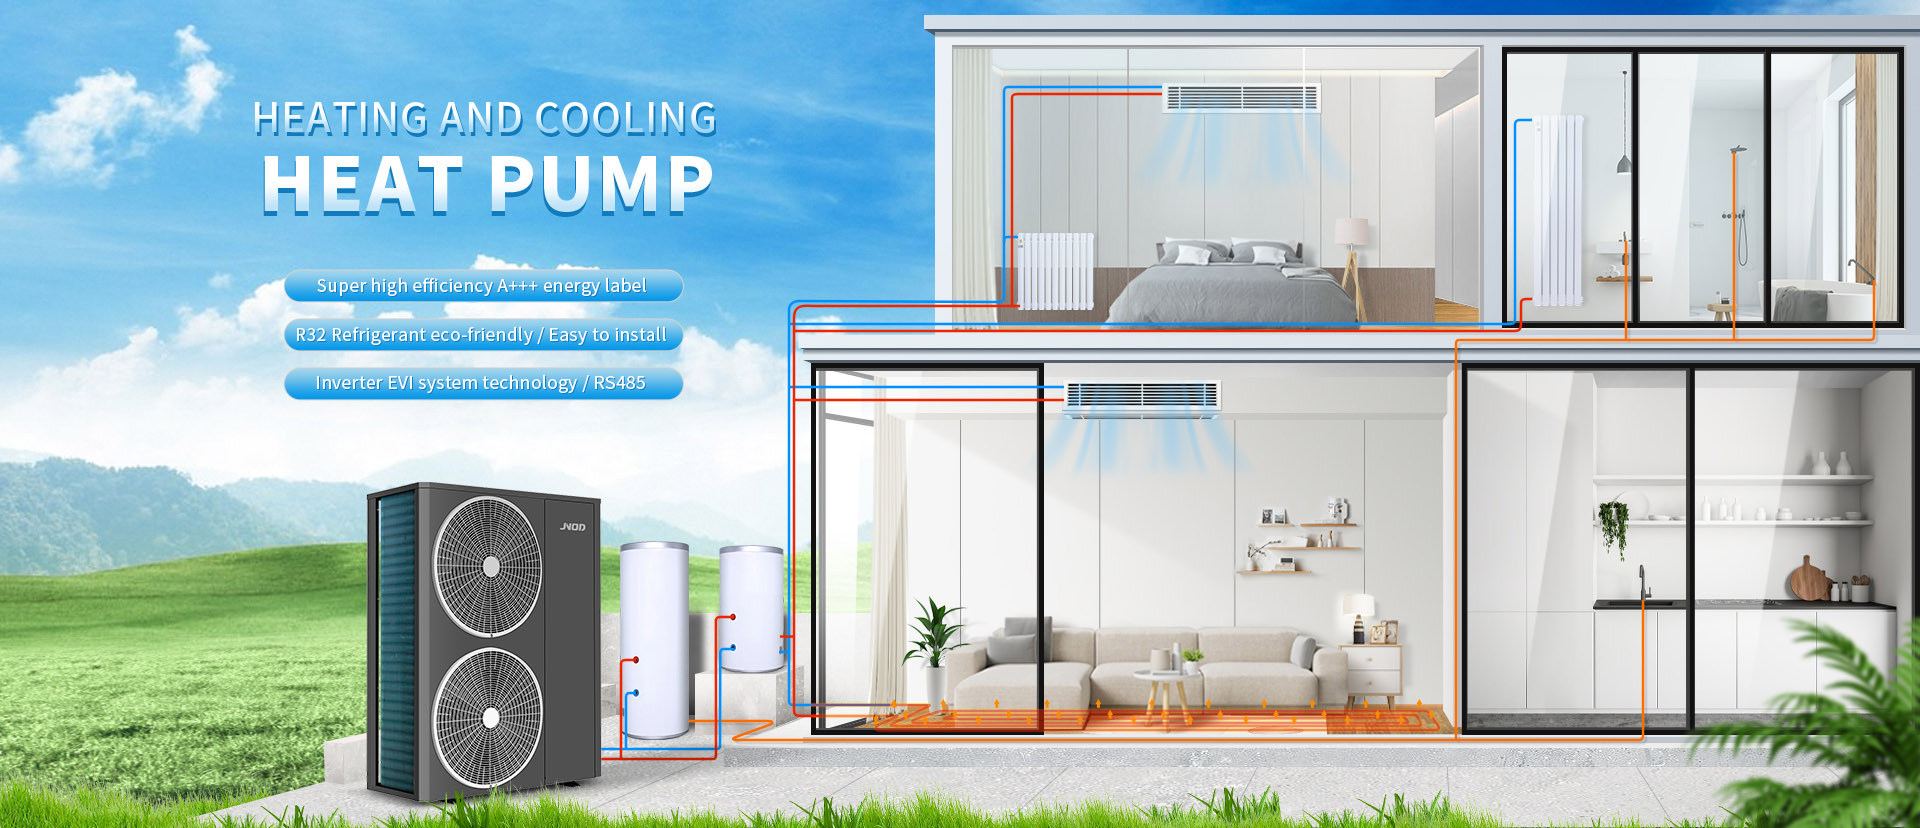 Heating And Cooling Heat Pump supplier